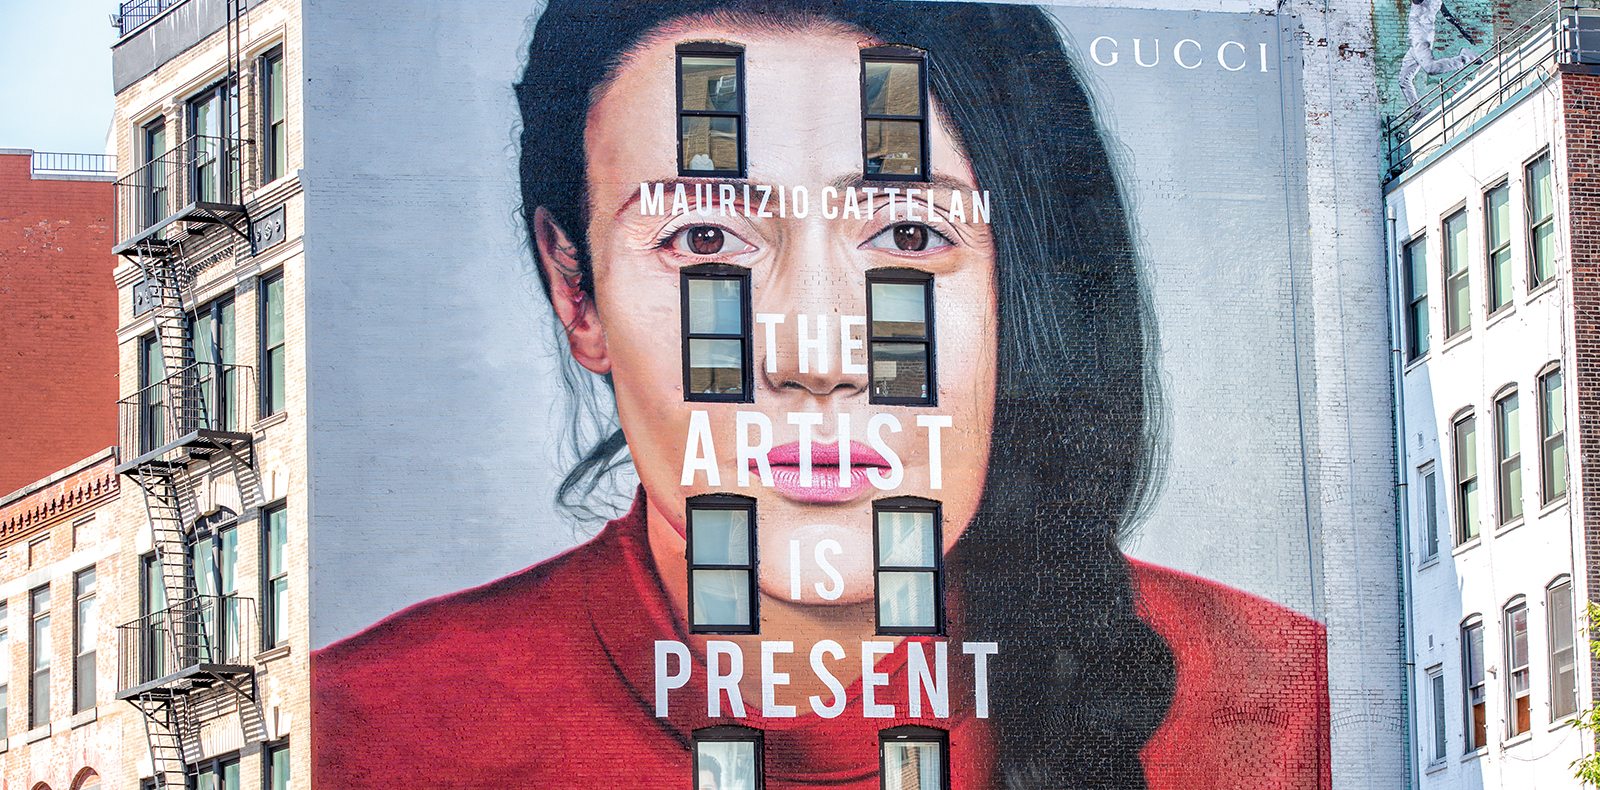 Gucci’s Art Wall in New York.